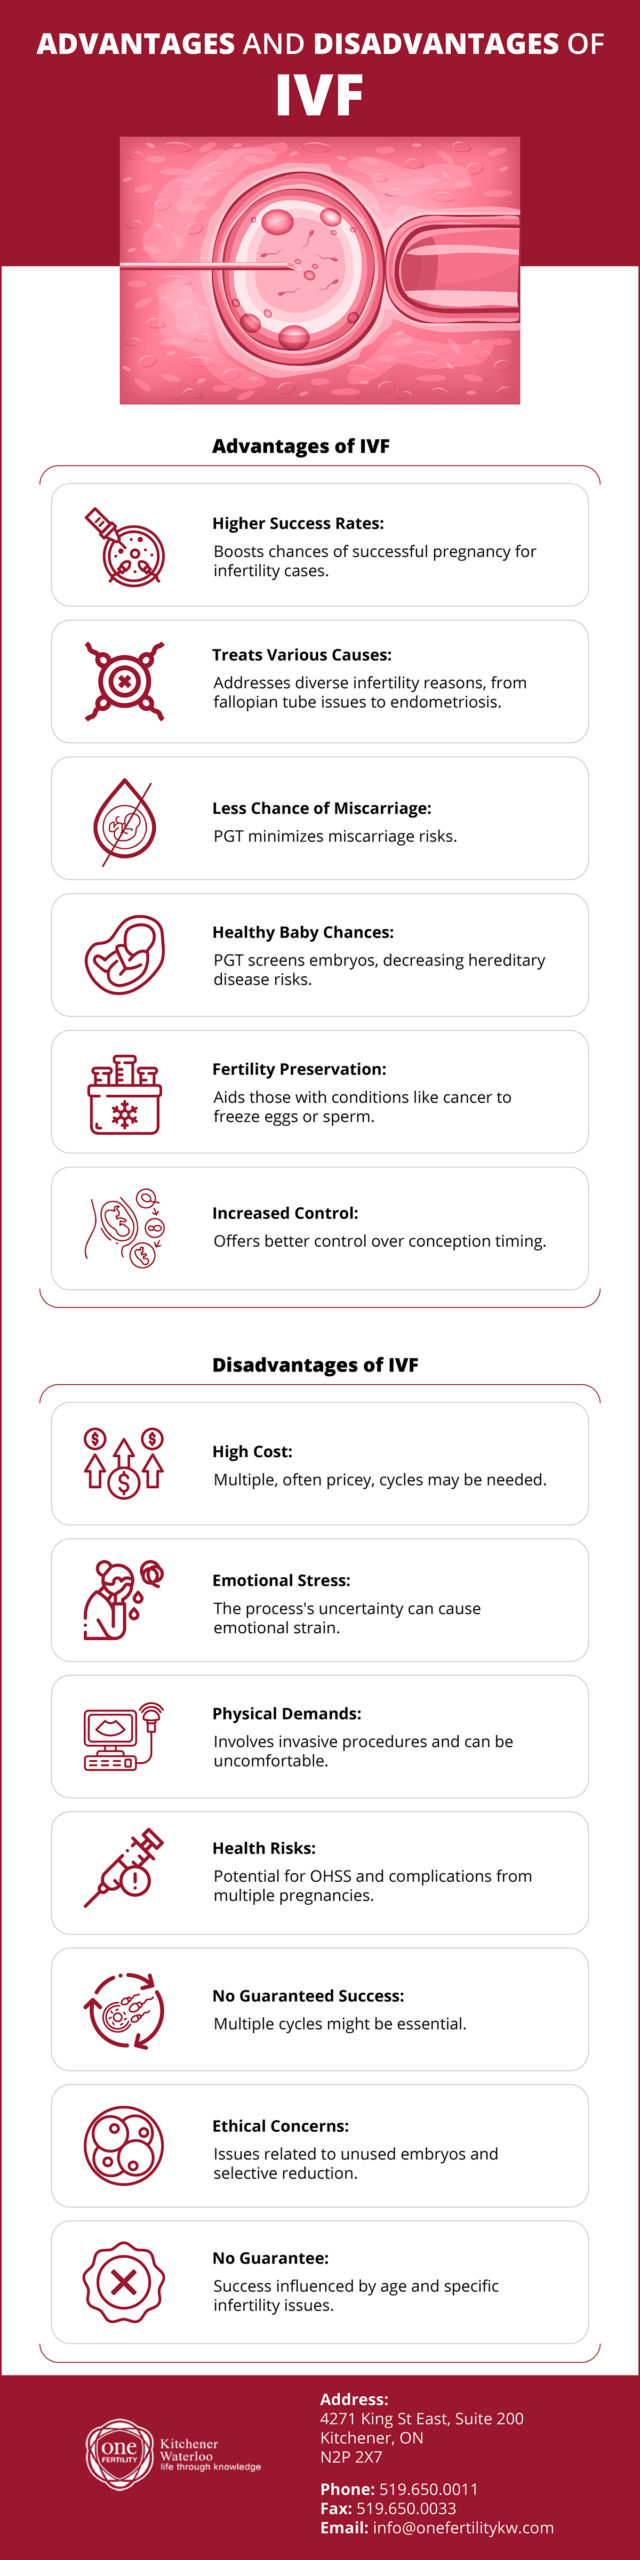 Advantages and Disadvantages of IVF-01